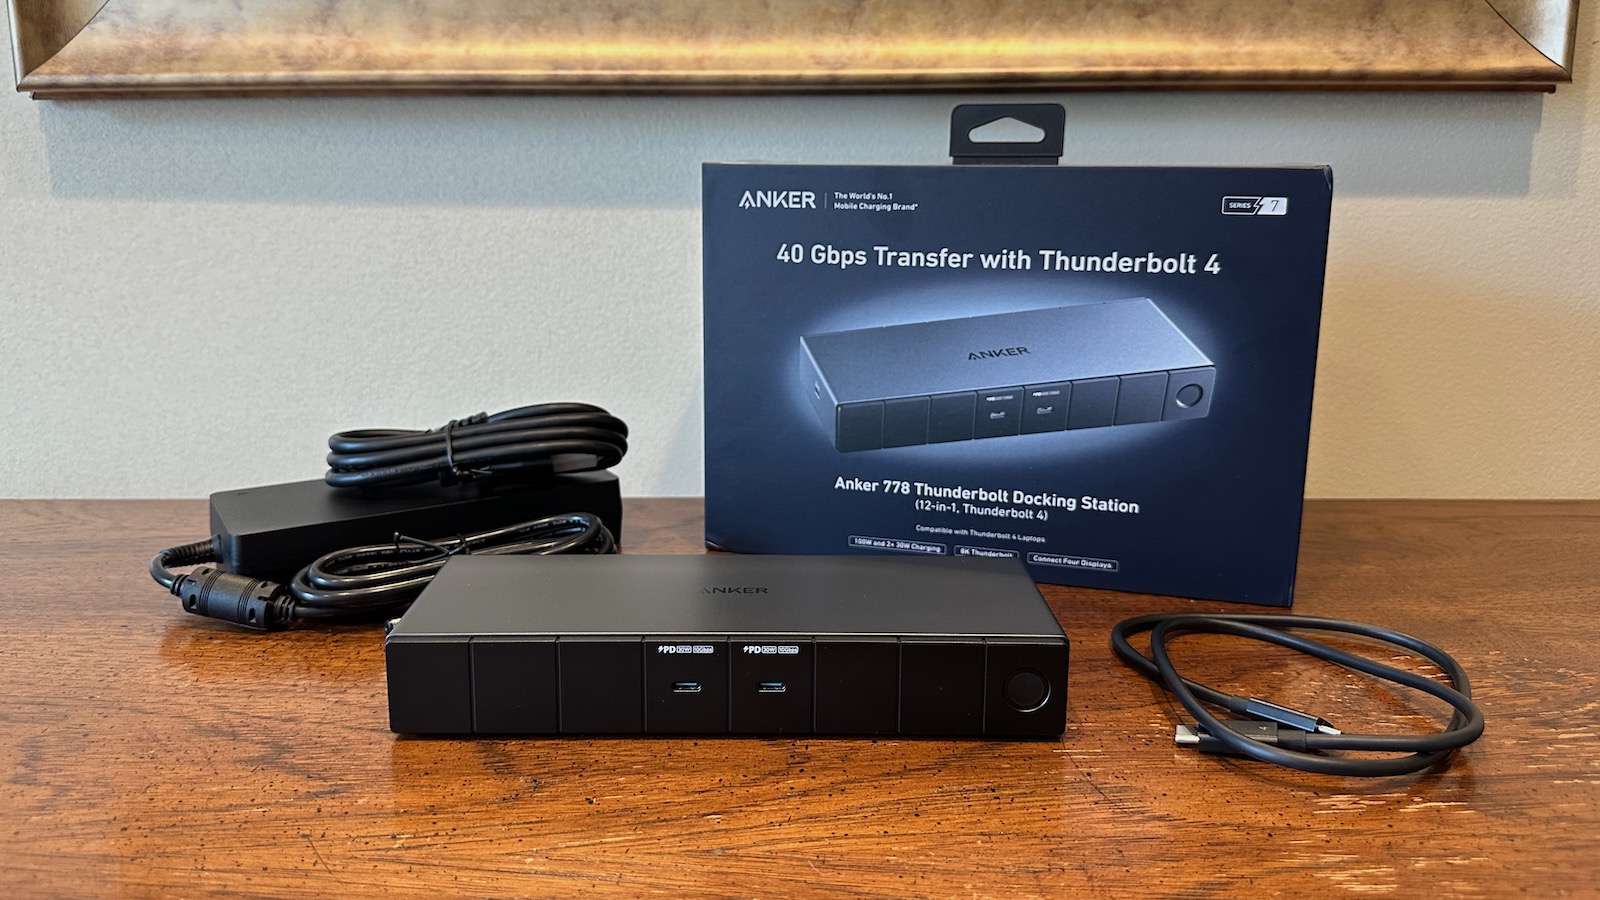 Review: Anker’s 778 Thunderbolt 4 Docking Station Offers an Array of USB and Display Connectivity Options